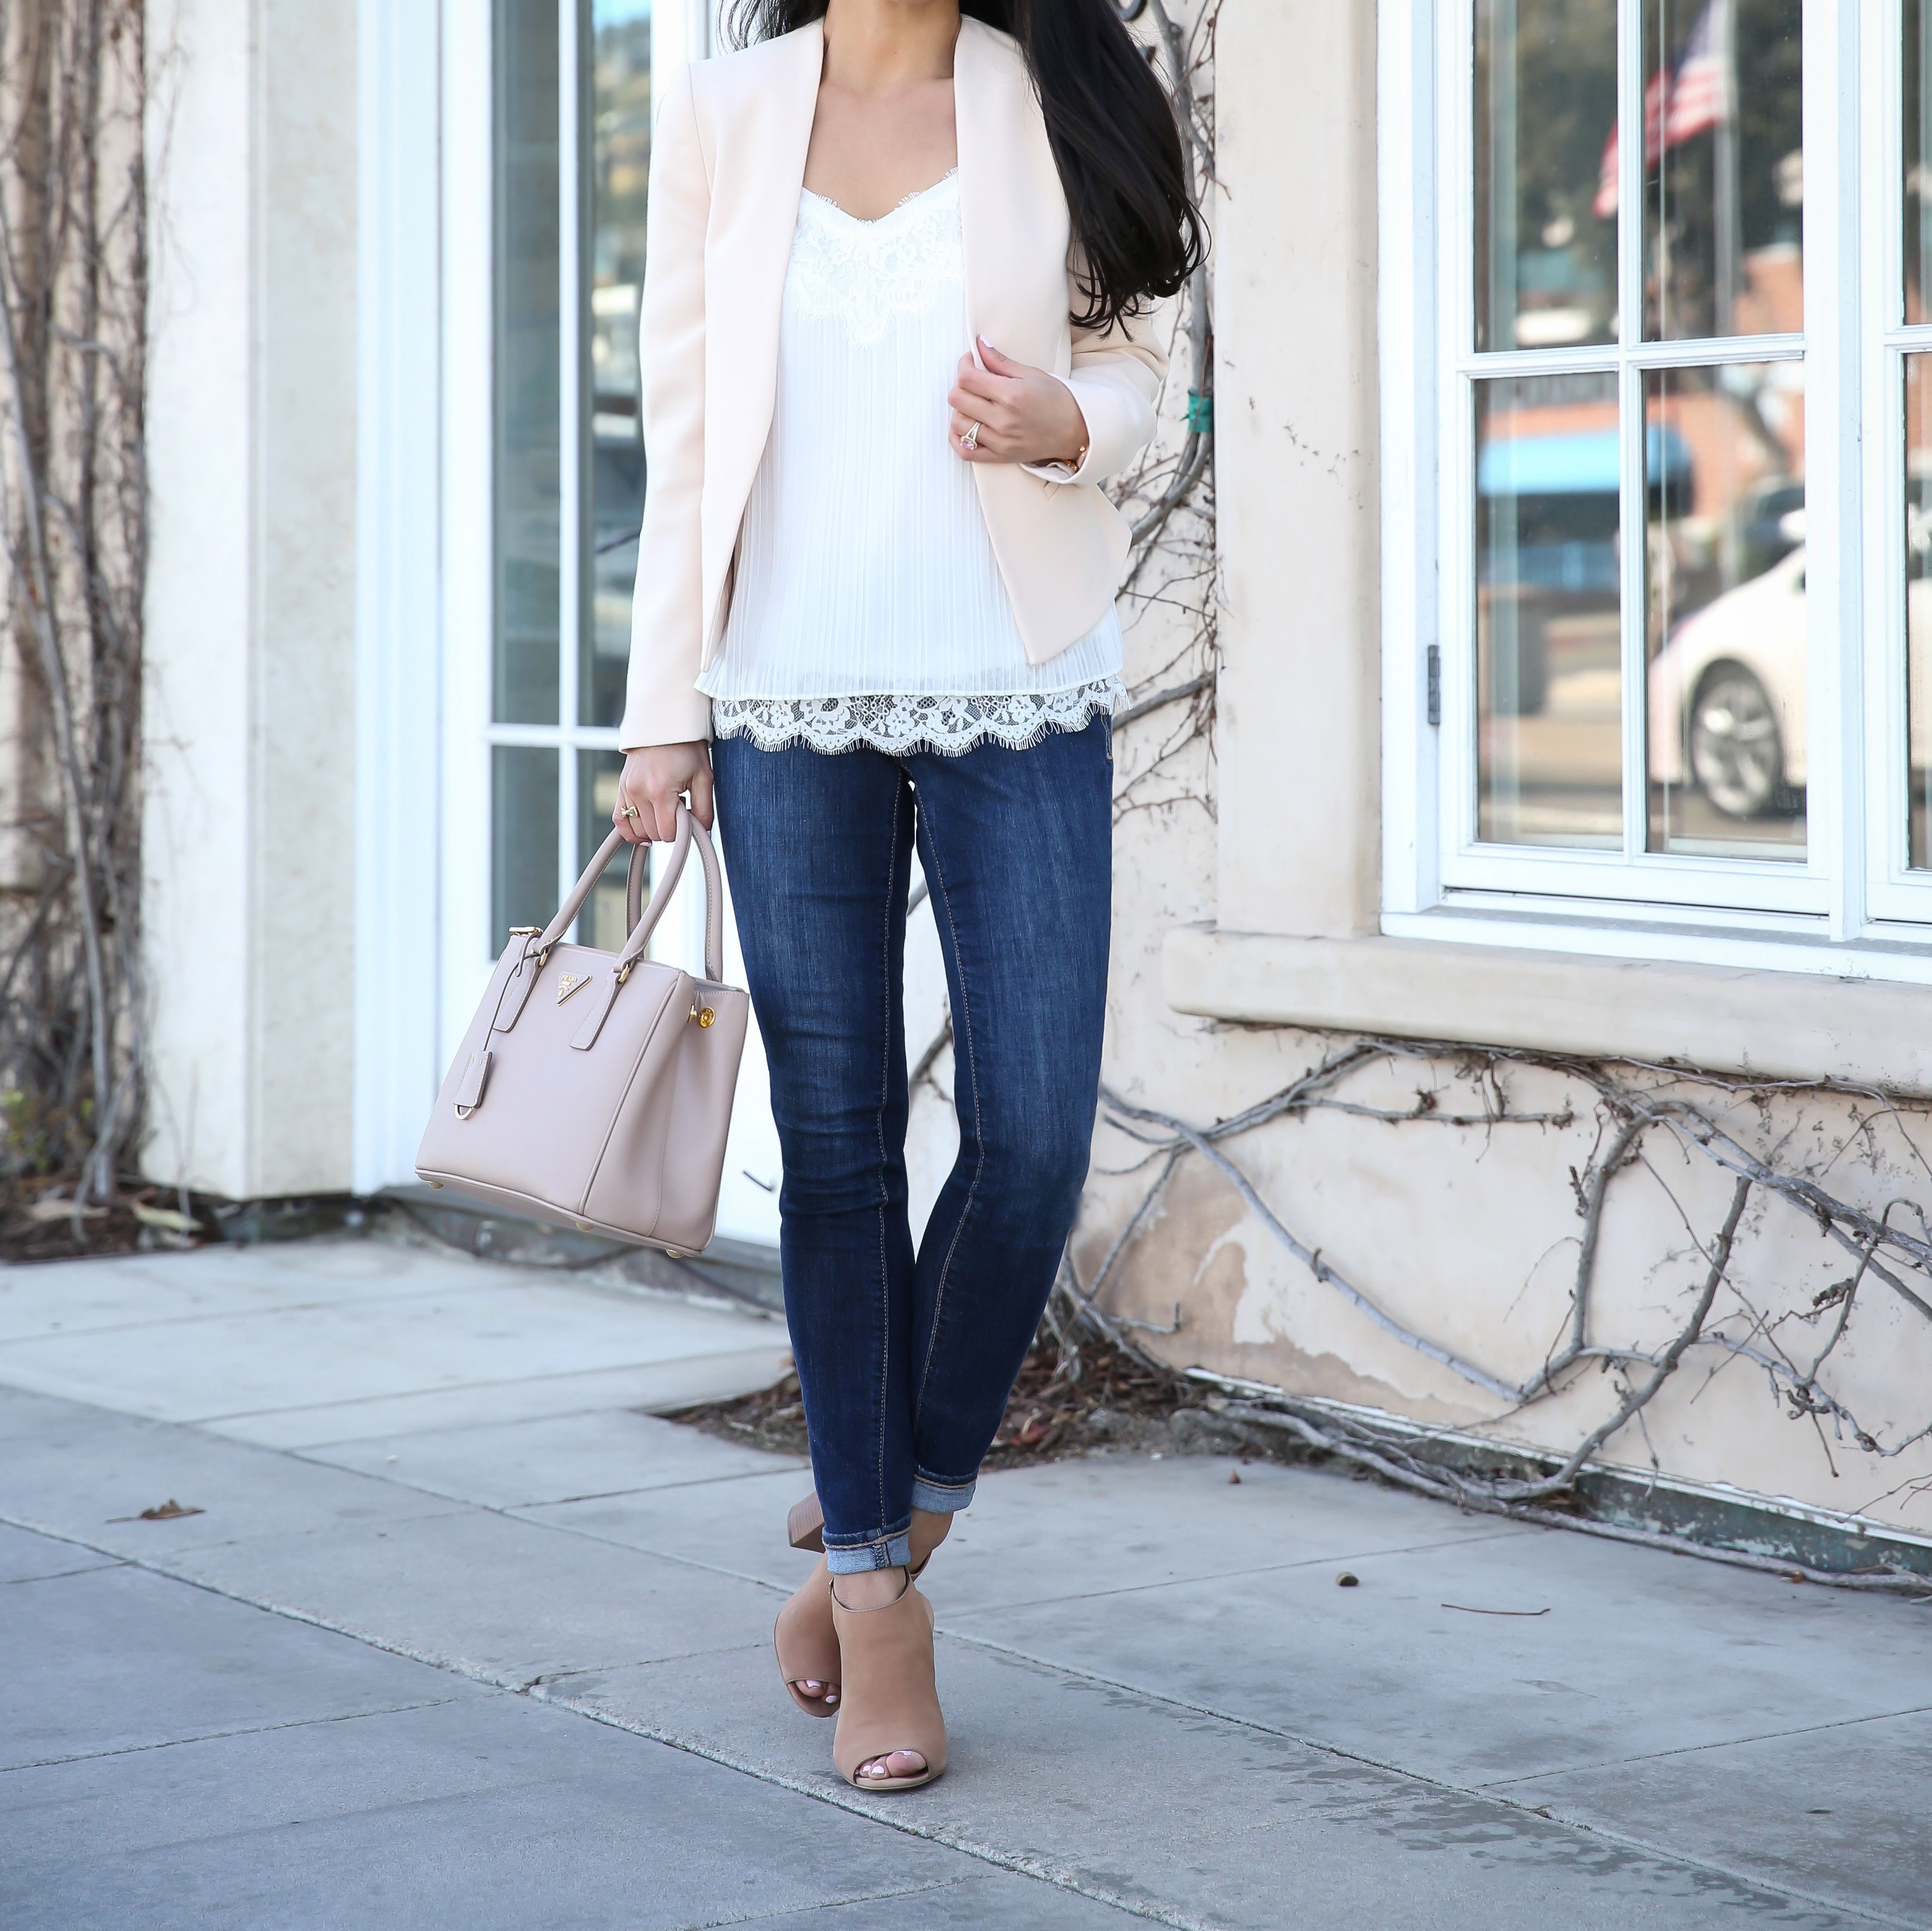 Pleated lace cami, casual spring outfit